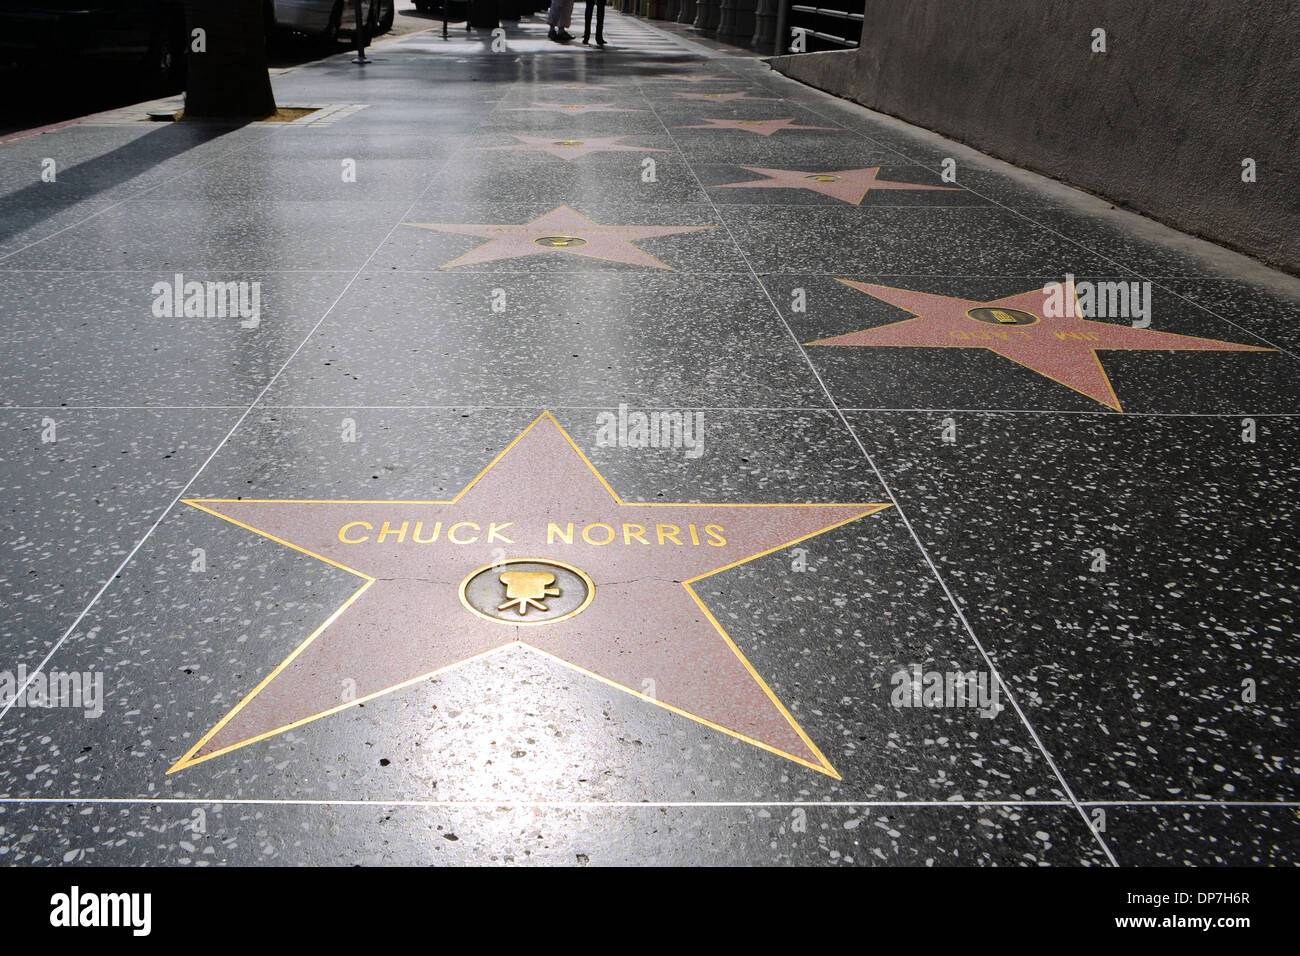 Chuck Norris' star on Hollywood Walk of Fame at Hollywood Boulevard in Los Angeles Stock Photo